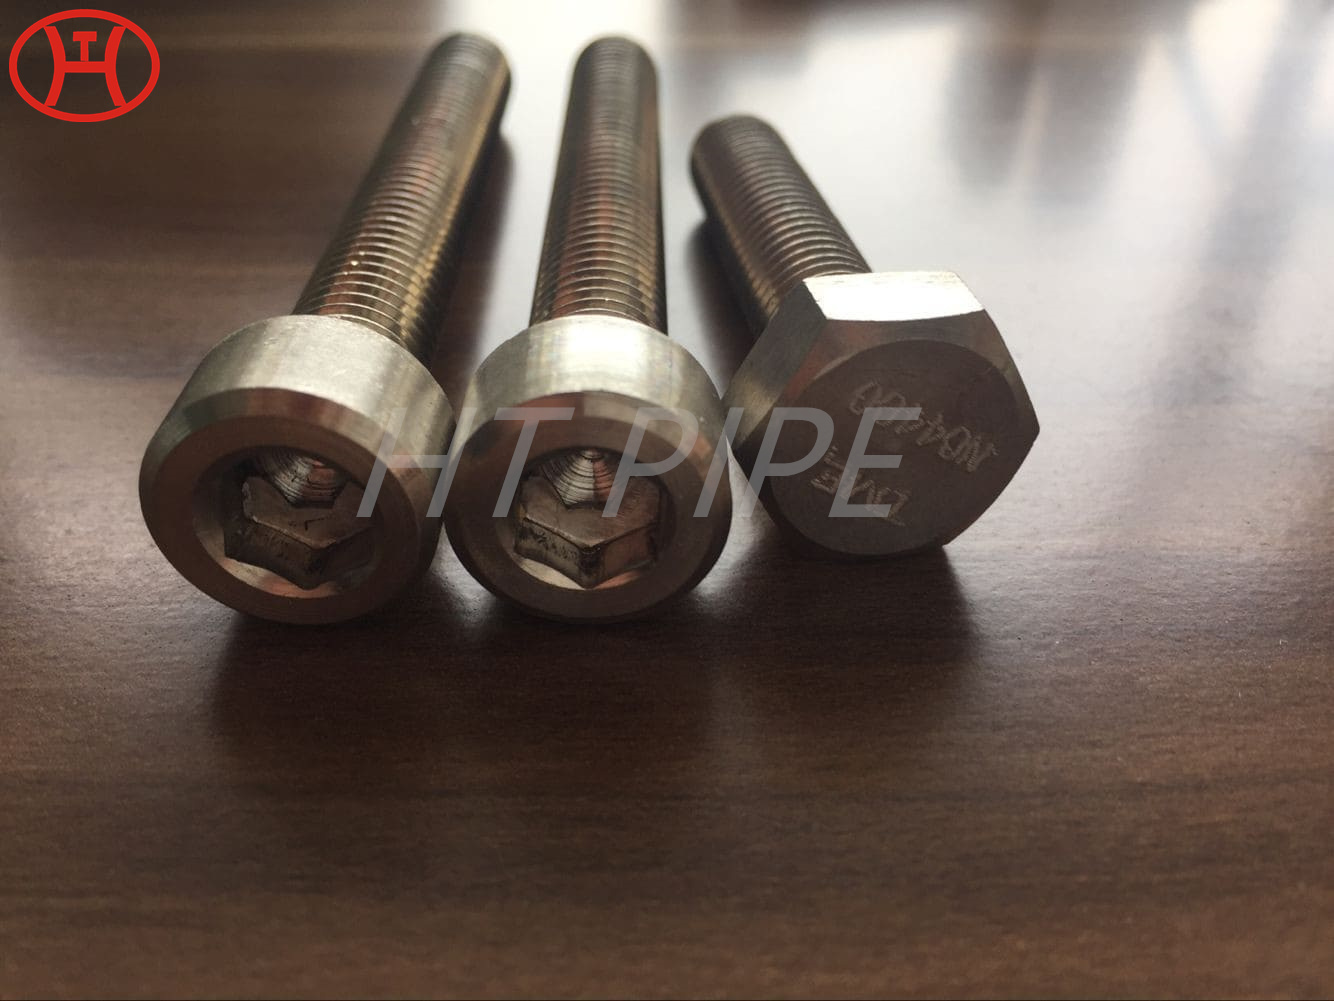 DIN931 ASTM A193 B7 partial thread Nature alloy steel stock din933 din931 alloy steel hex bolt